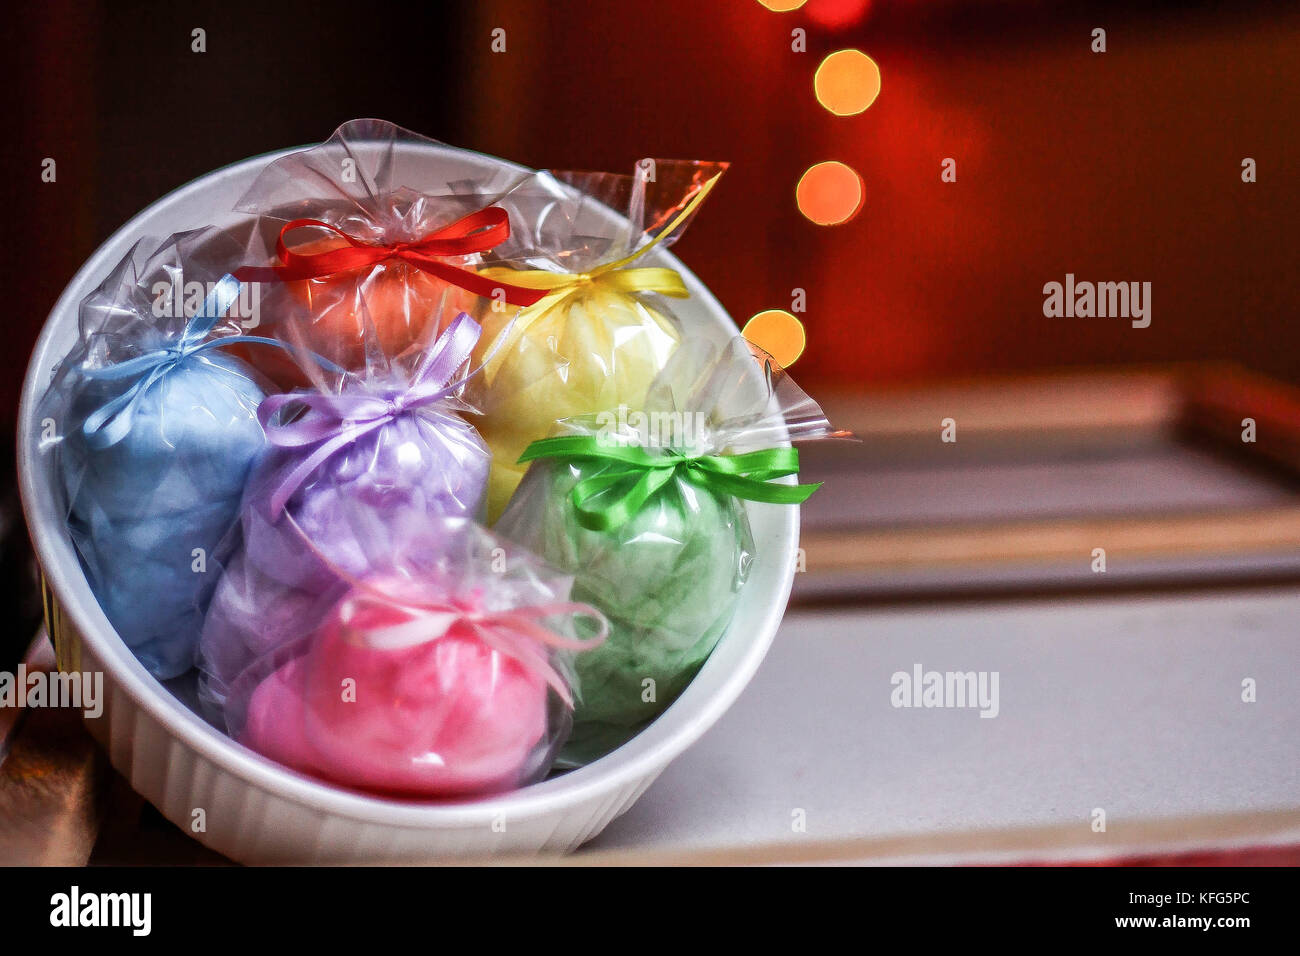 Rainbow filled White bowl with individually wrapped and rainbow color assorted party favors with blurred light effect in background Stock Photo